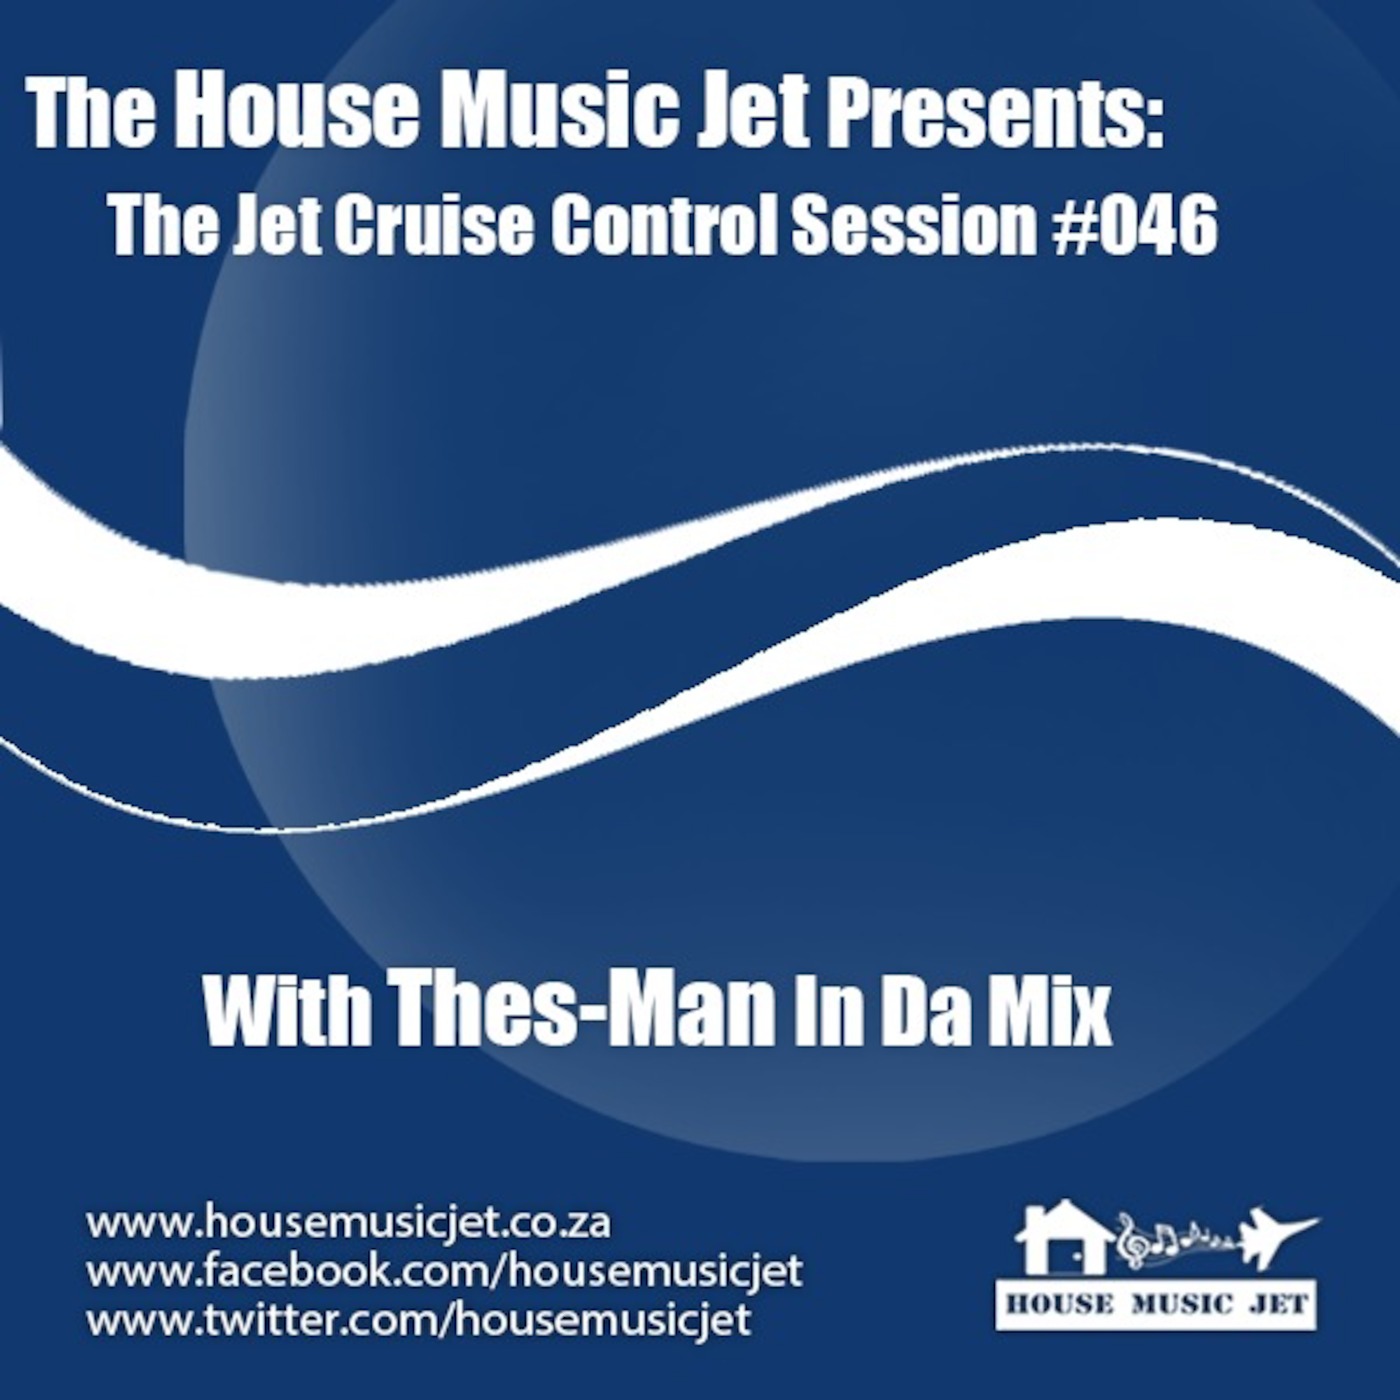 Thes-Man In Da Mix - Jet Cruise Control Session 46